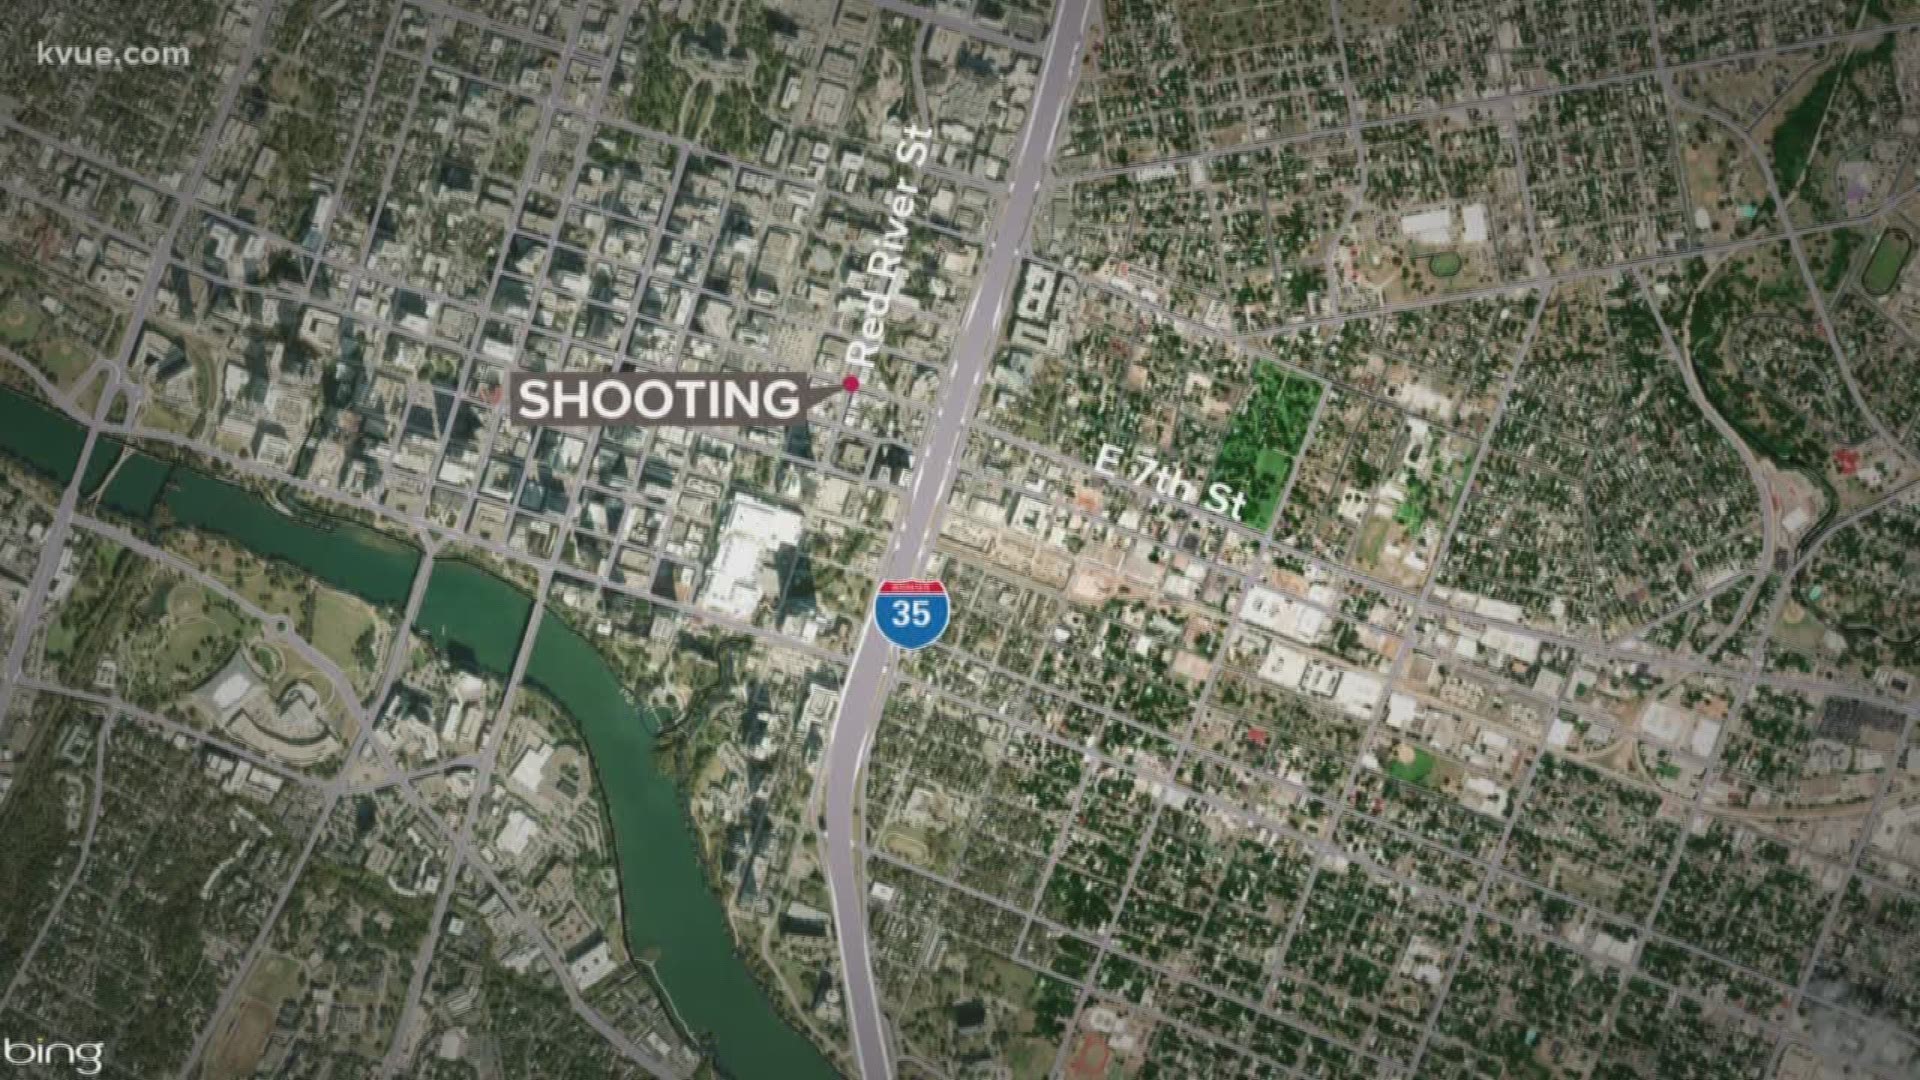 Authorities are investigating after a woman was shot in Downtown Austin.